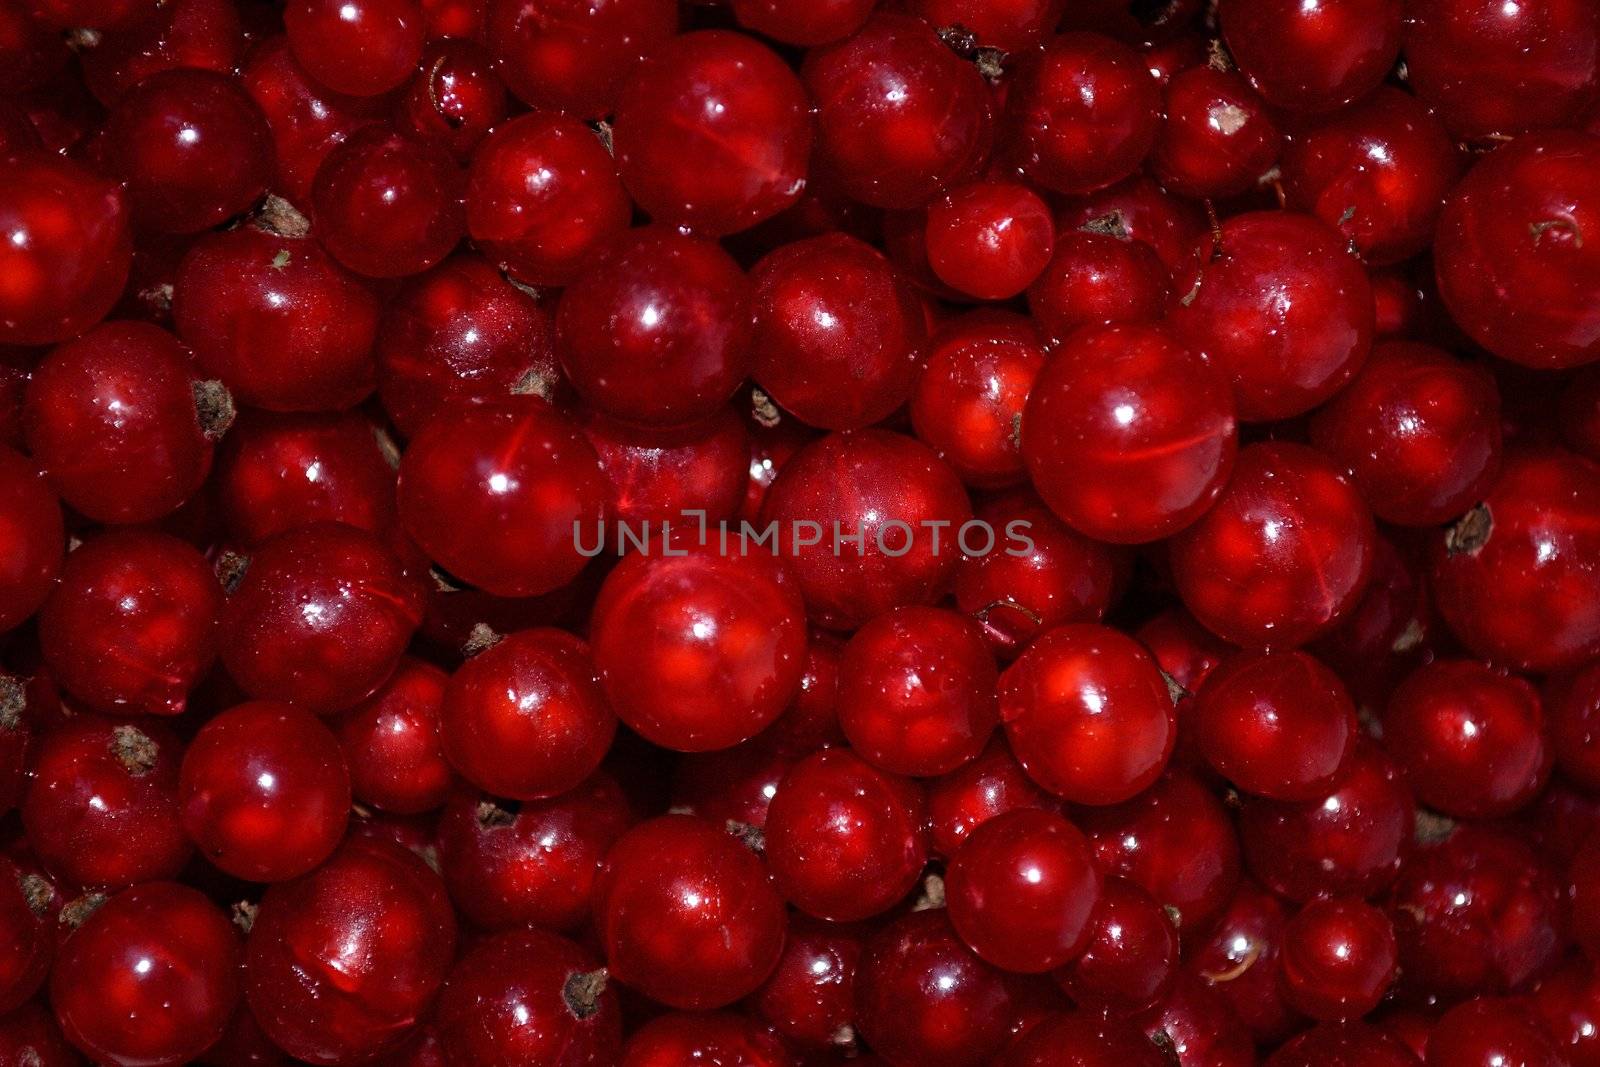 Red currant berries background